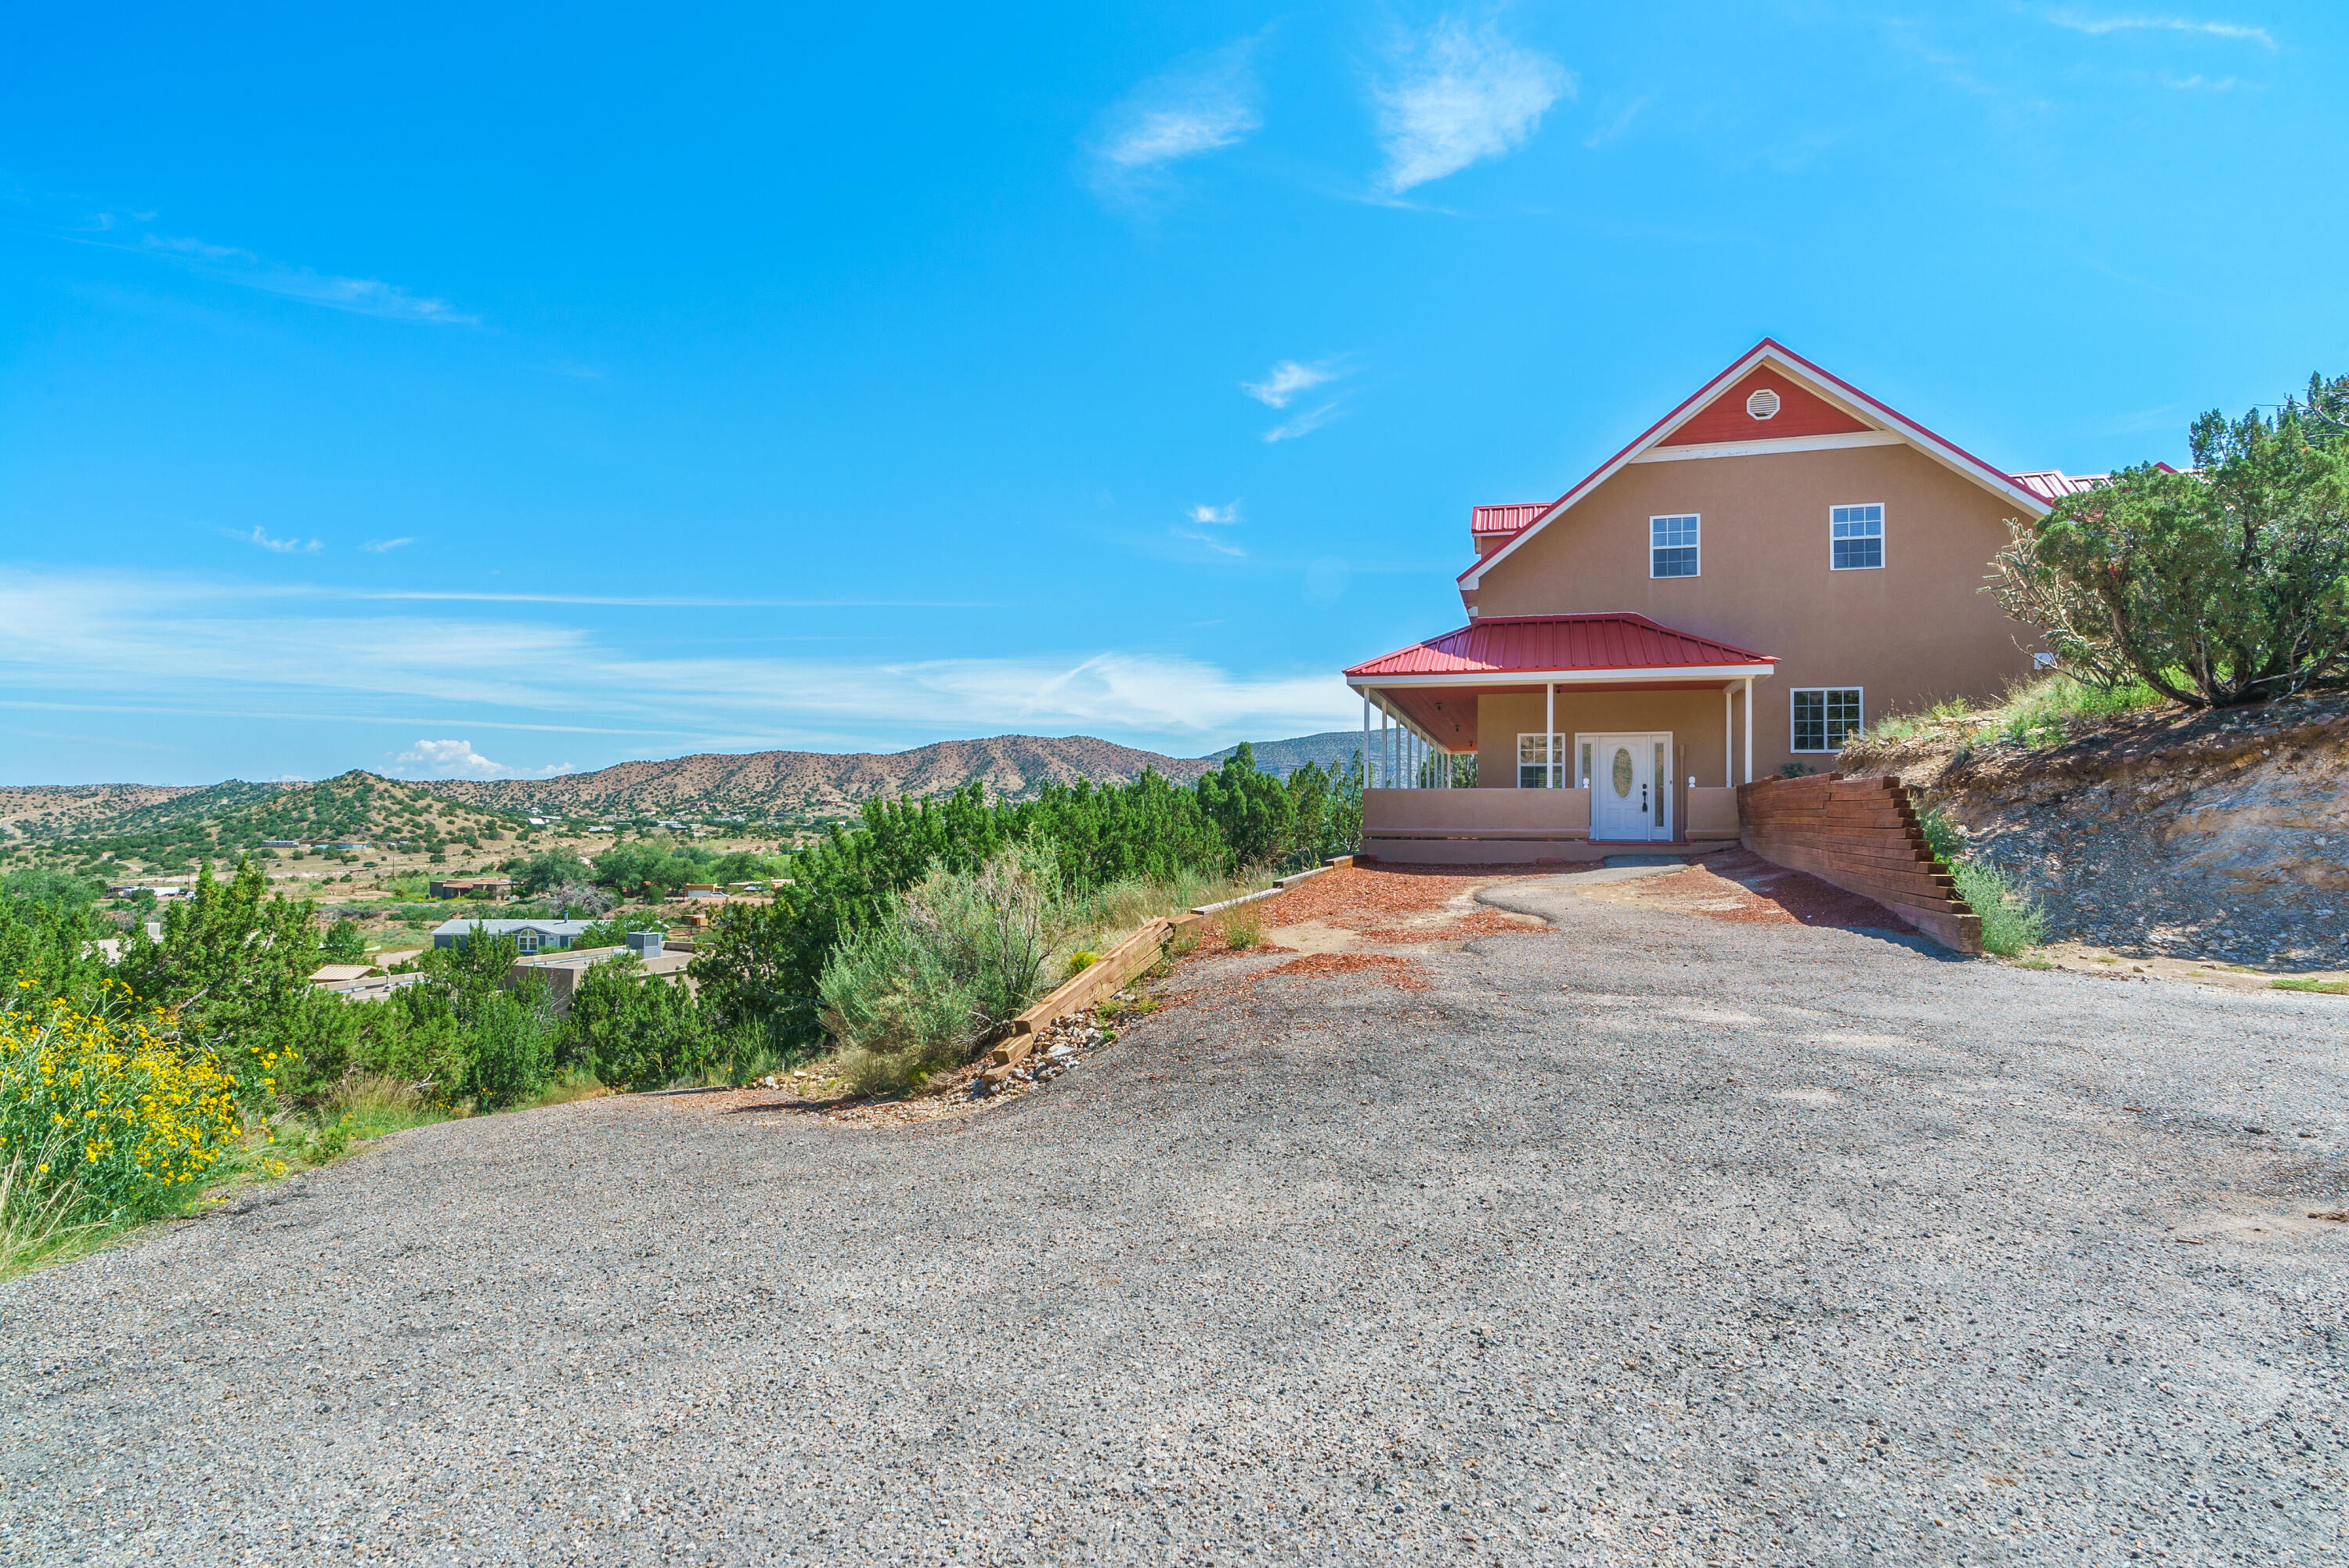 Amazing custom 2 story Ranch home located in the beautiful Village of Placitas! Sitting up on a hilltop on 1.55 acres and a full wrap around porch, you are surrounded by nothing but nature. Home features 3,480 sq. ft. w/4 Bedrooms, 3 baths, and a 400 sq. ft. Garage Plus additional single car garage or storage! Gourmet Kitchen with maple cabinets, granite countertops and backsplash, bartop with room for seating, and tile floors. Main floor features a private bedroom and bathroom. Head upstairs to a Loft and 3 more bedrooms! Huge Master Suite with walk-in closet and private bathroom. Bathroom has a large soaking tub, walk-in shower, granite countertops and tile floors. Don't miss out on everything this home has to offer!